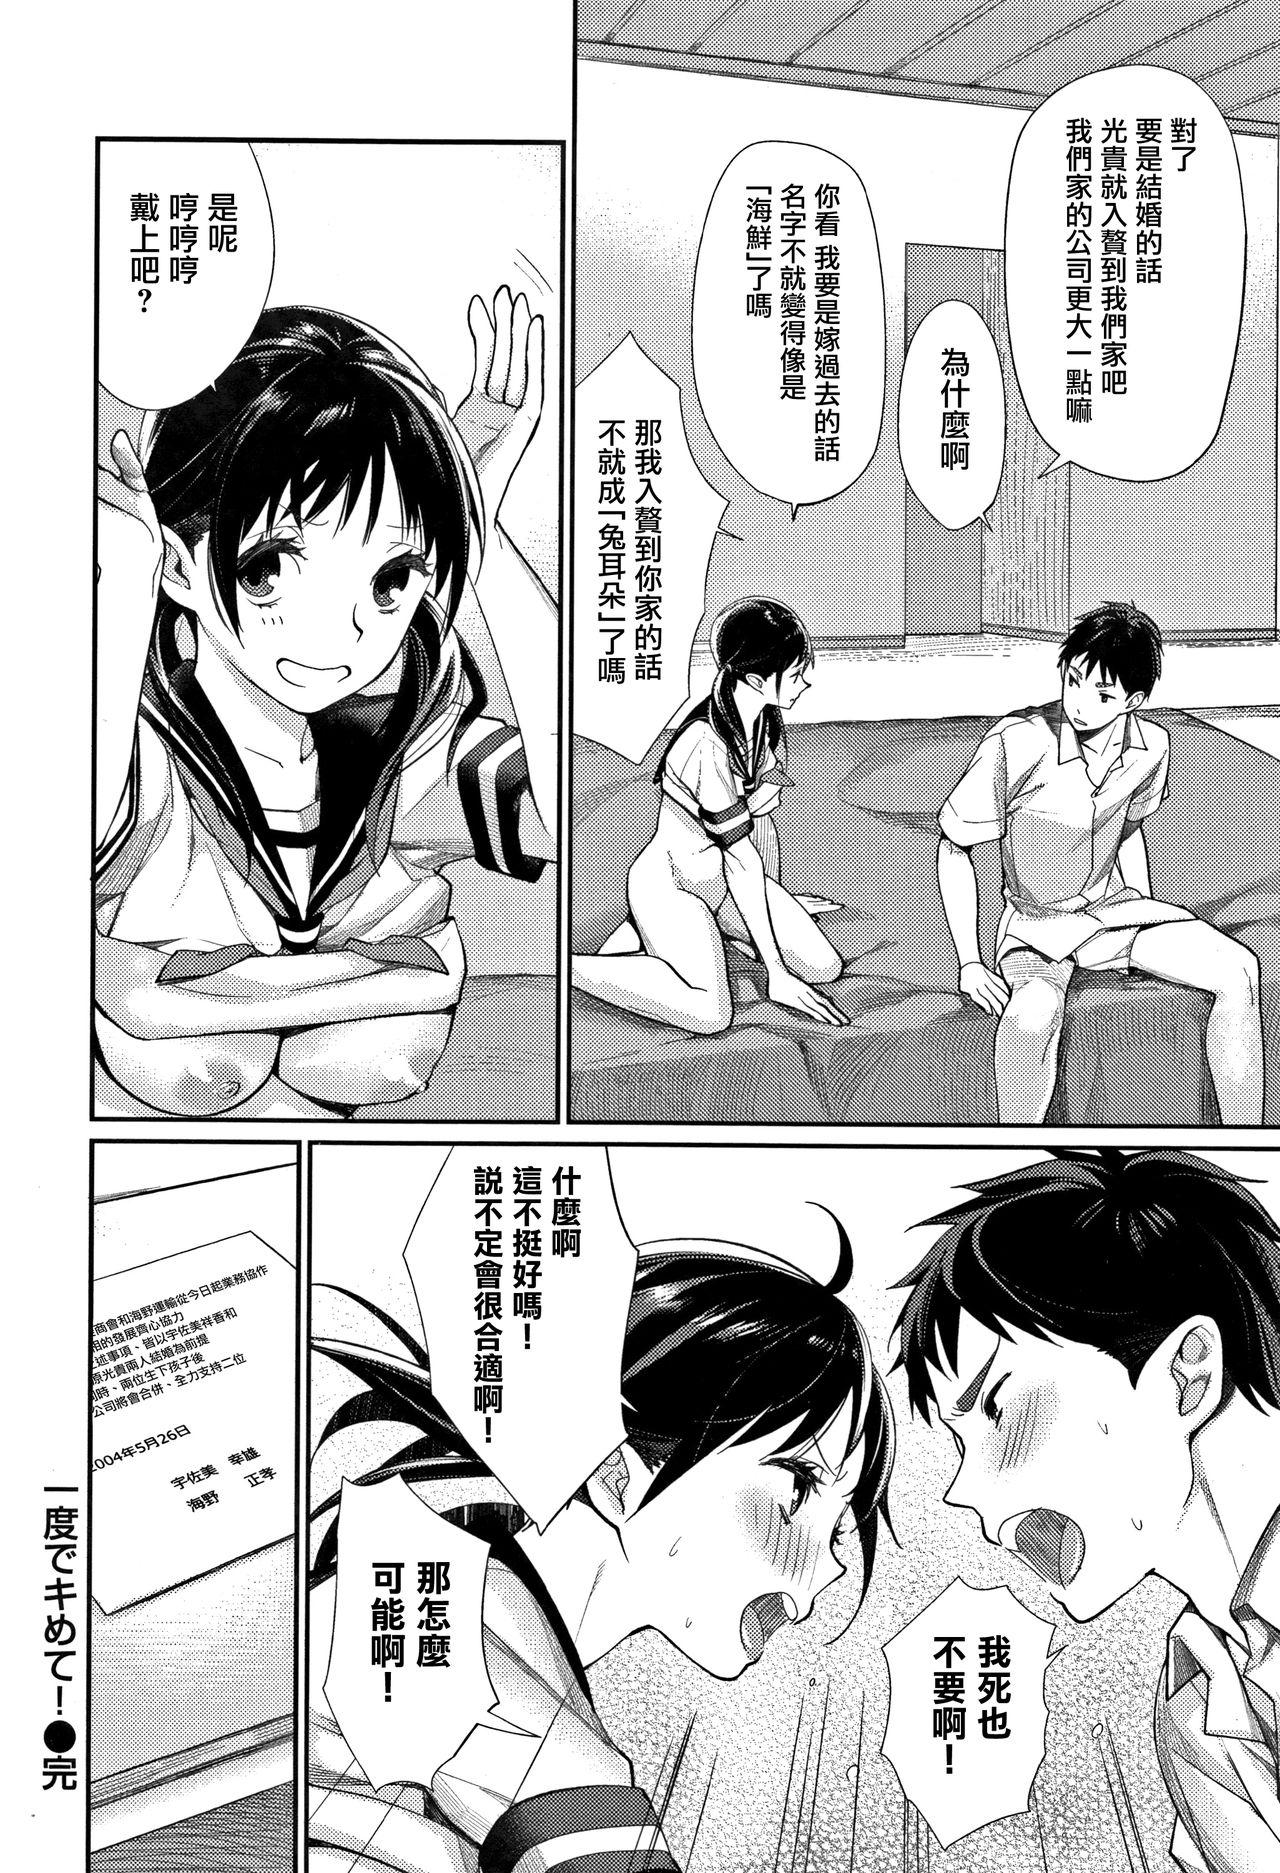 [MGMEE] Bokura no Etude - Our H Chu Do Ch.1-4 [Chinese] [無邪気漢化組] 99